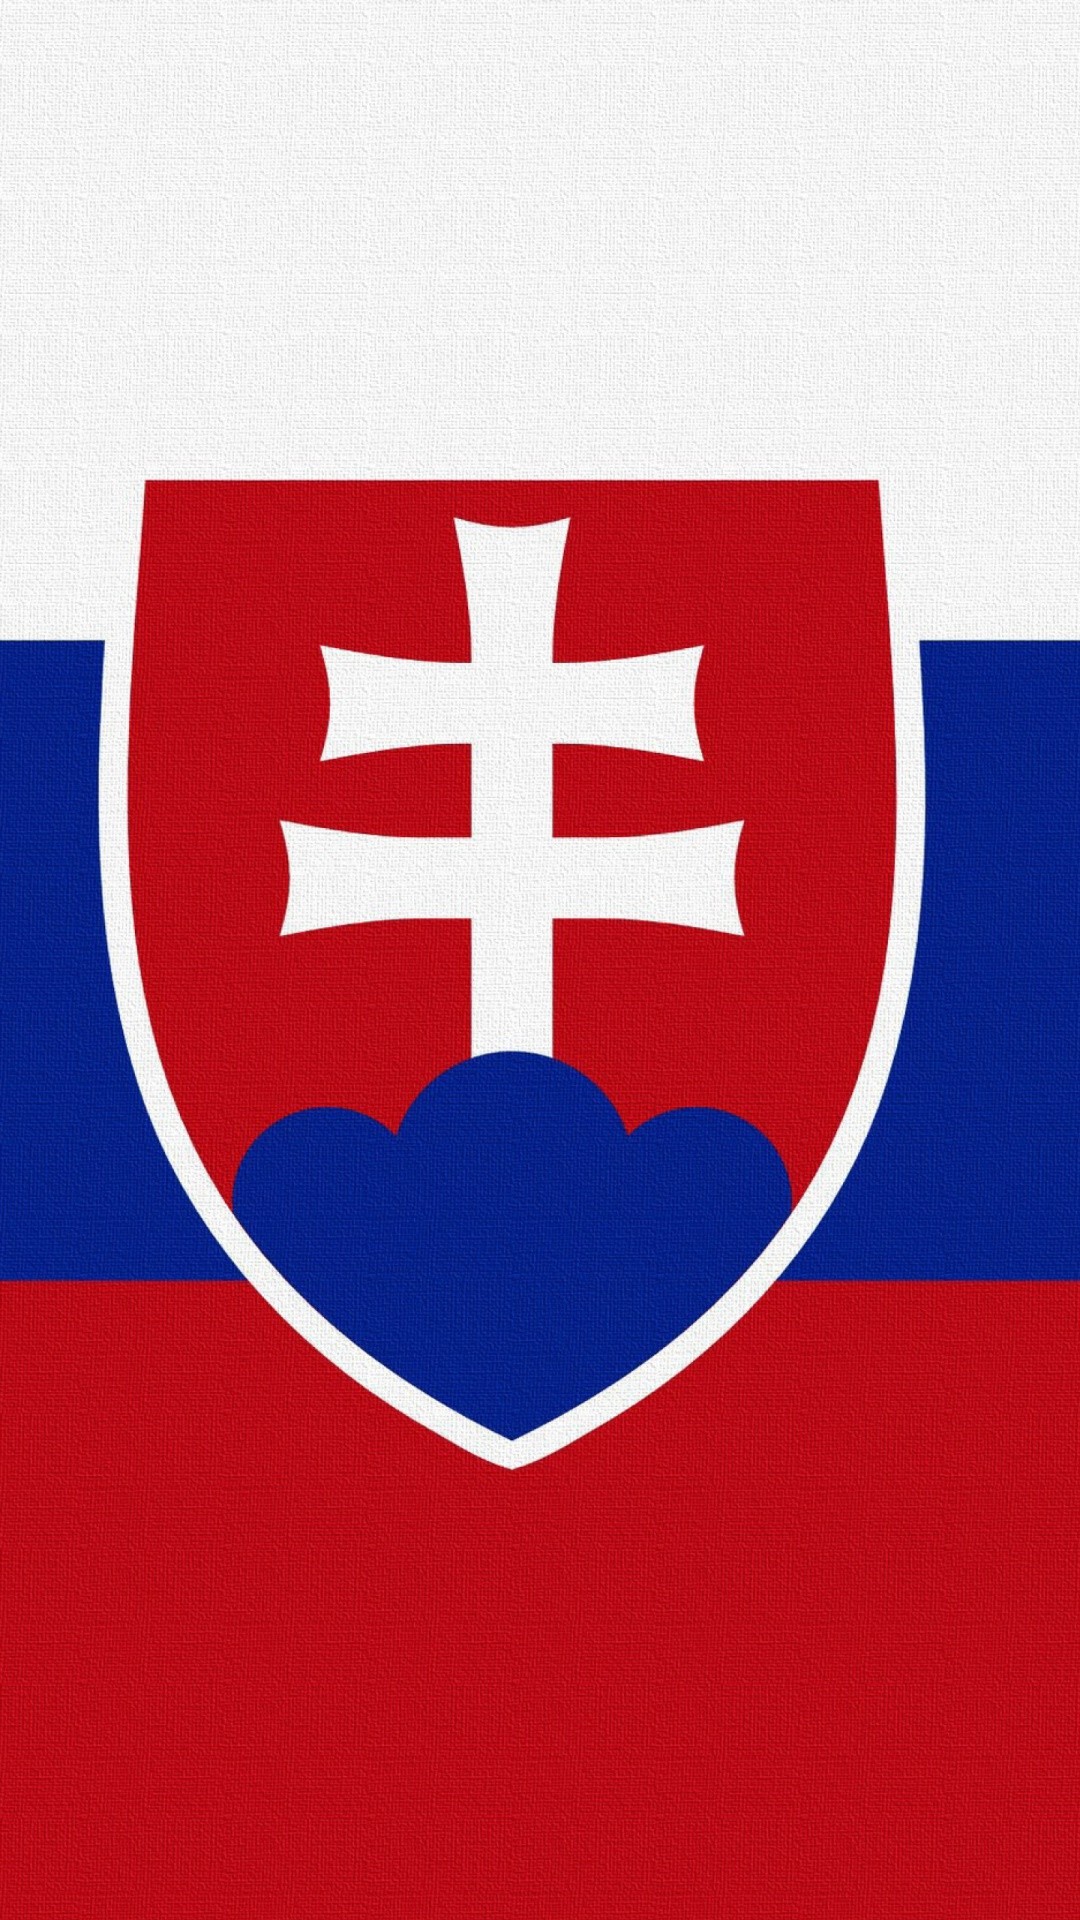 1080x1920 Slovakia flag iphone 6 mobile wallpapers free